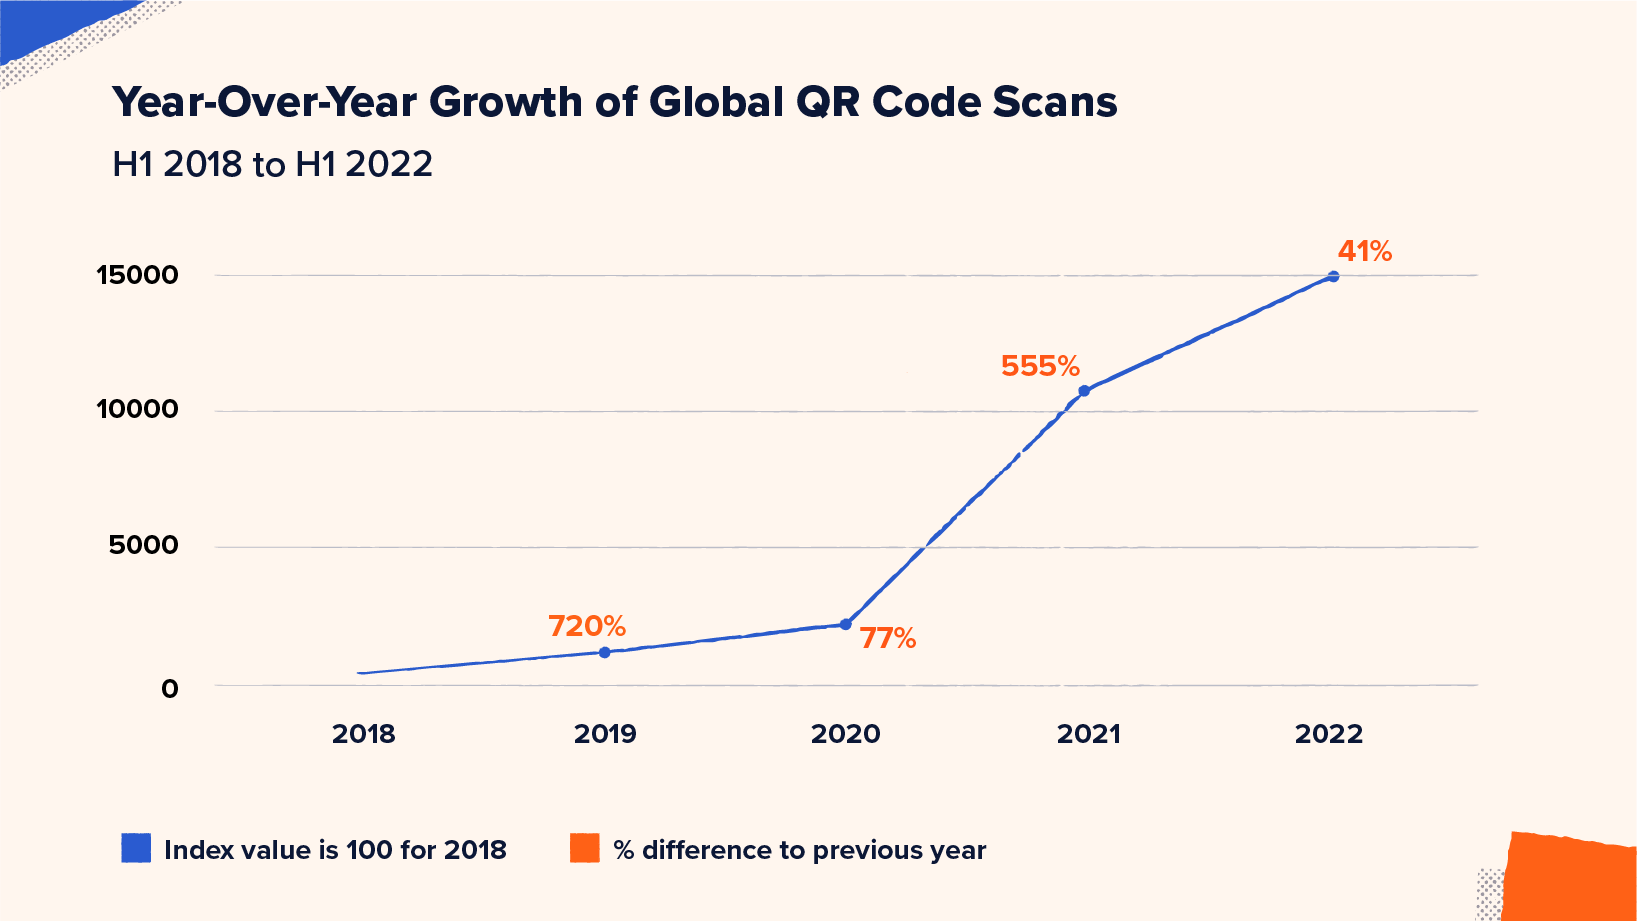 A graph depicting year-over-year growth of global QR Code scans from 2018 to 2022.